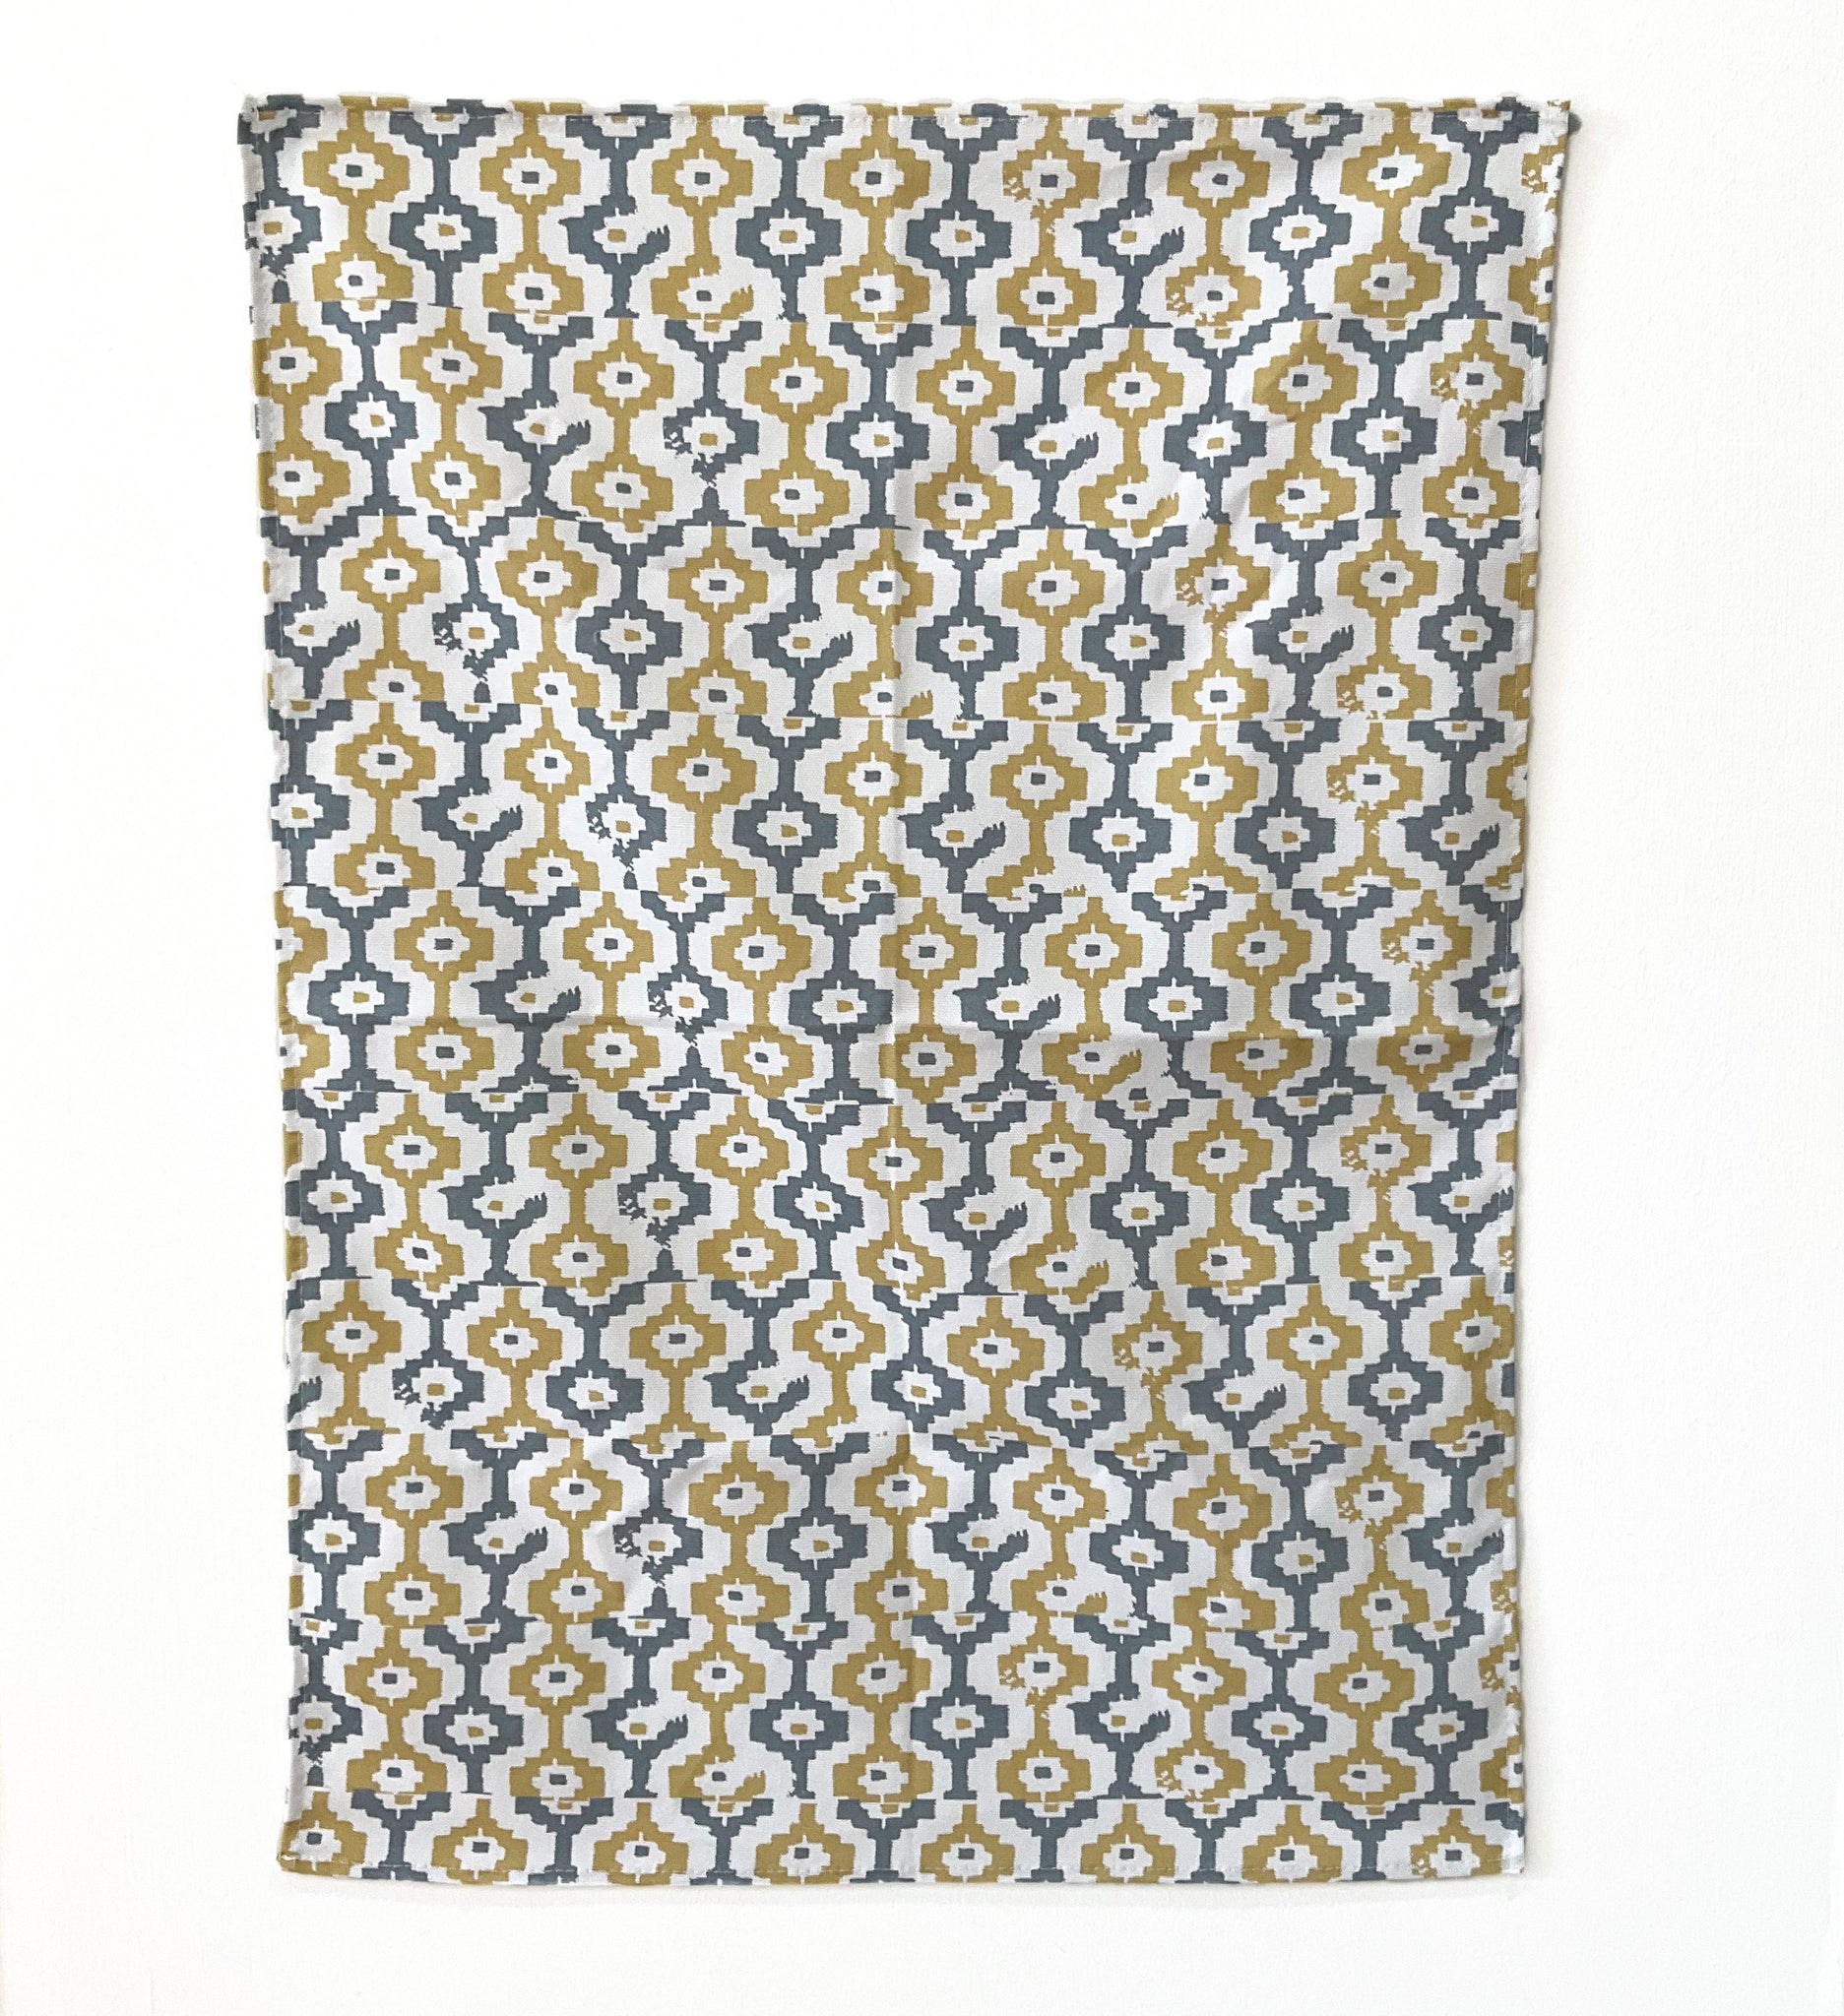 A tea towel featuring a grey and yellow geometric pattern on a white background.